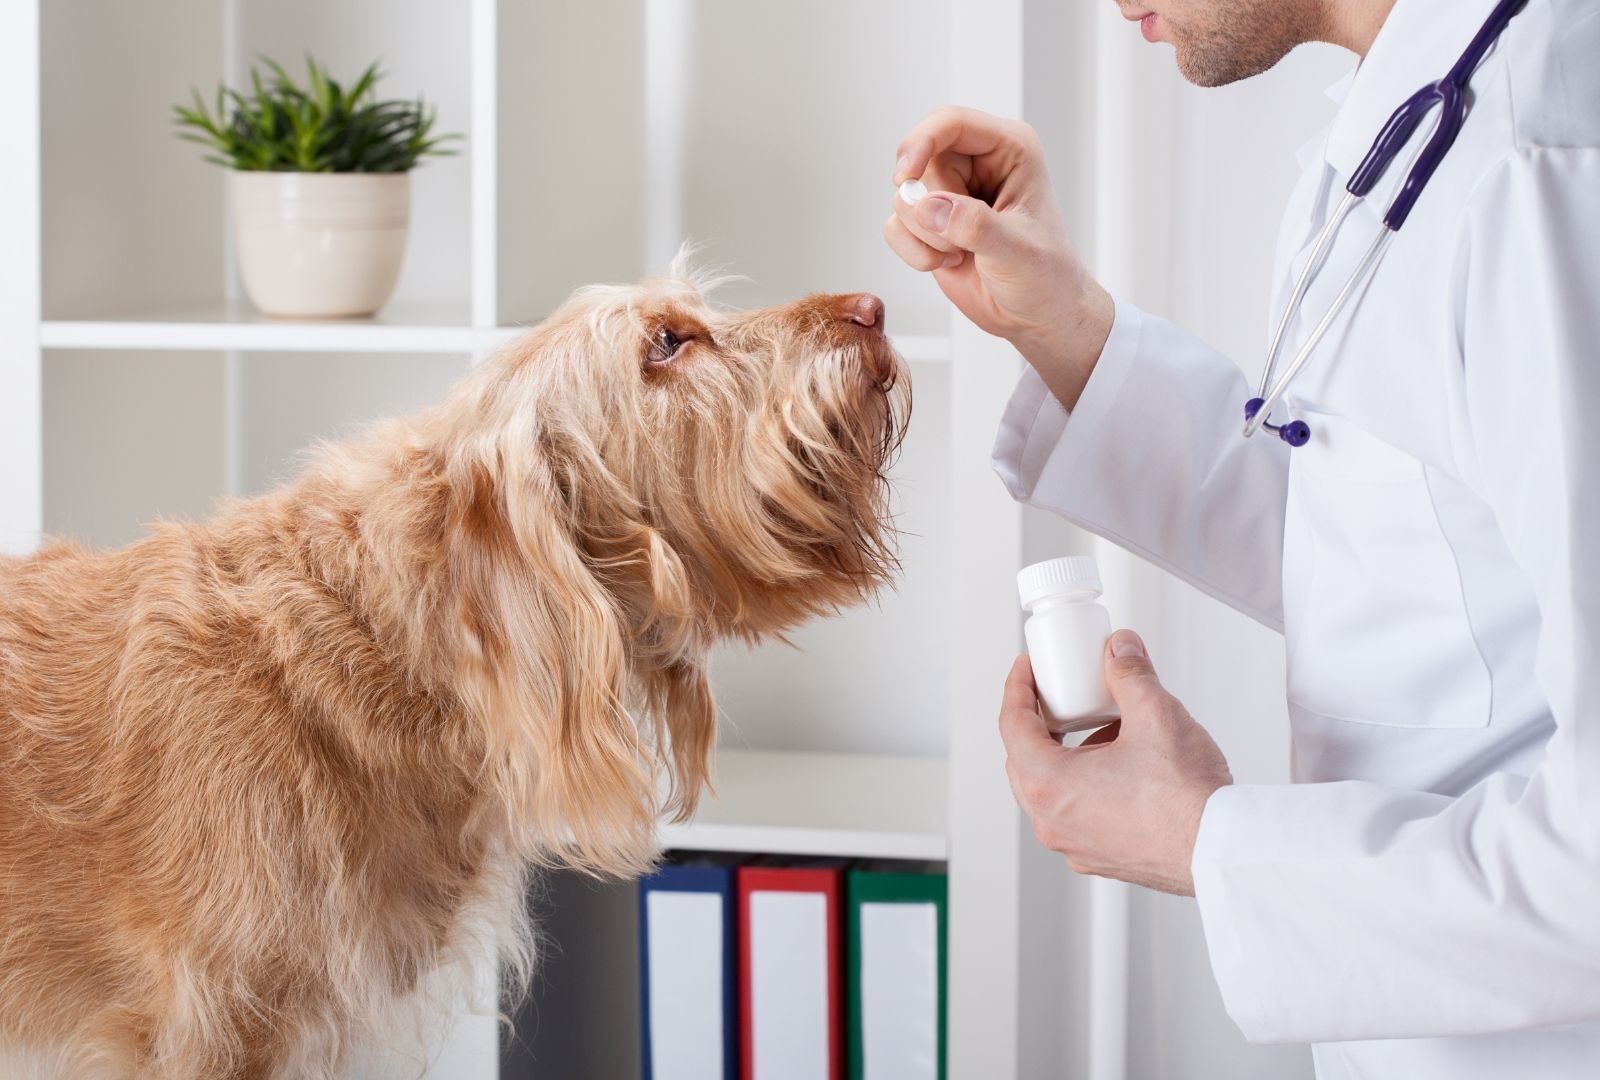 How to find the right Veterinarian for your dog